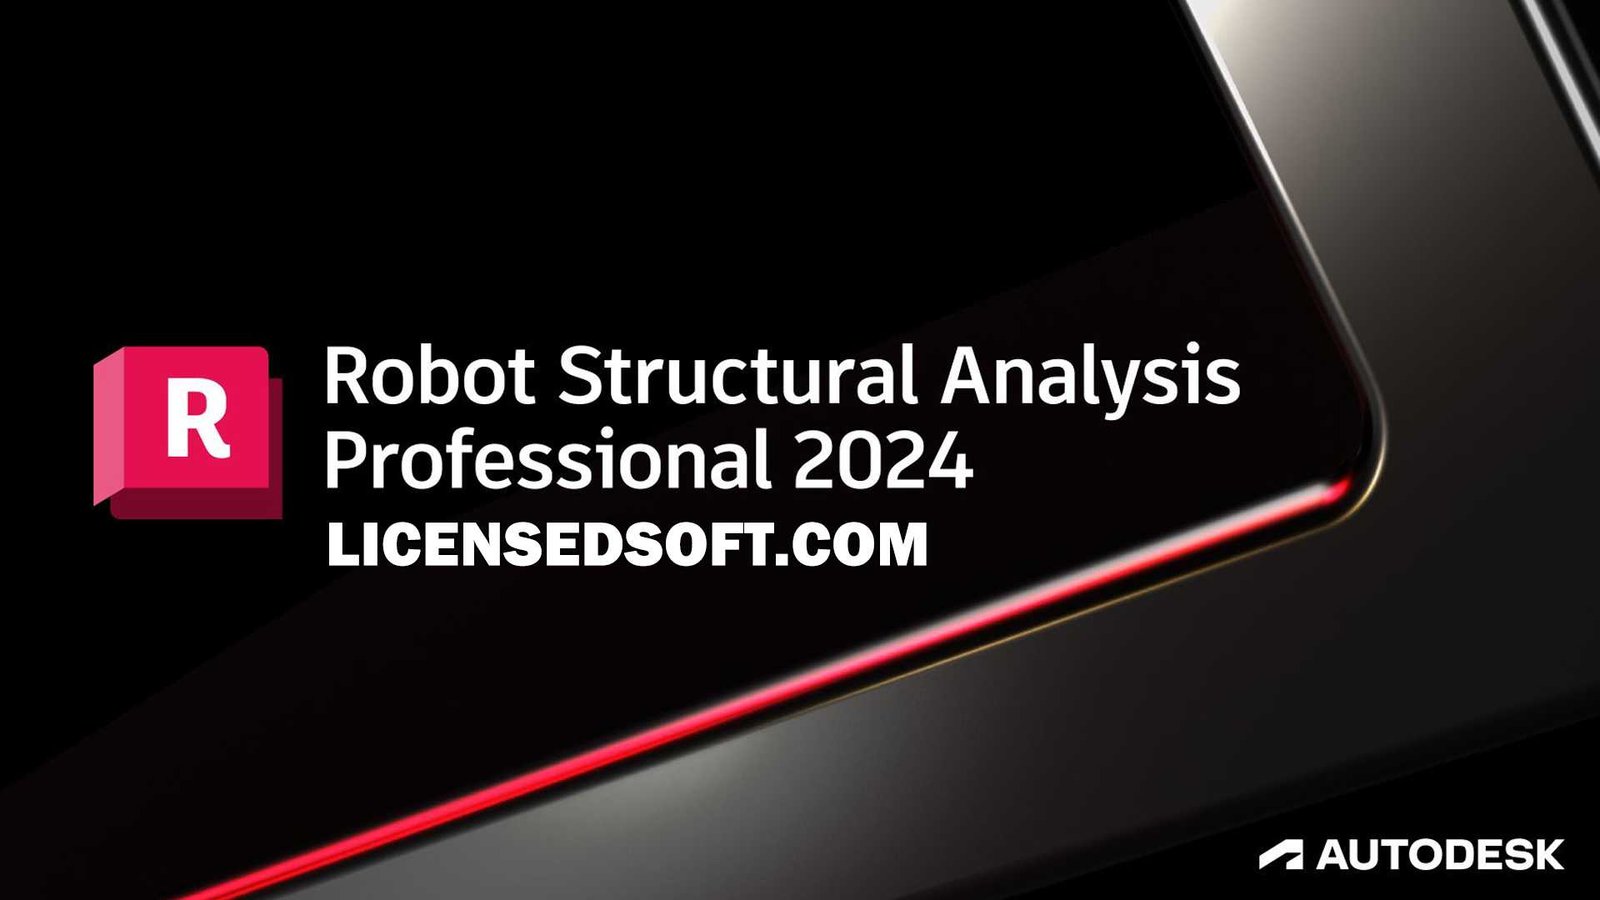 Autodesk Robot Structural Analysis Professional 2024 Cover By LicensedSoft